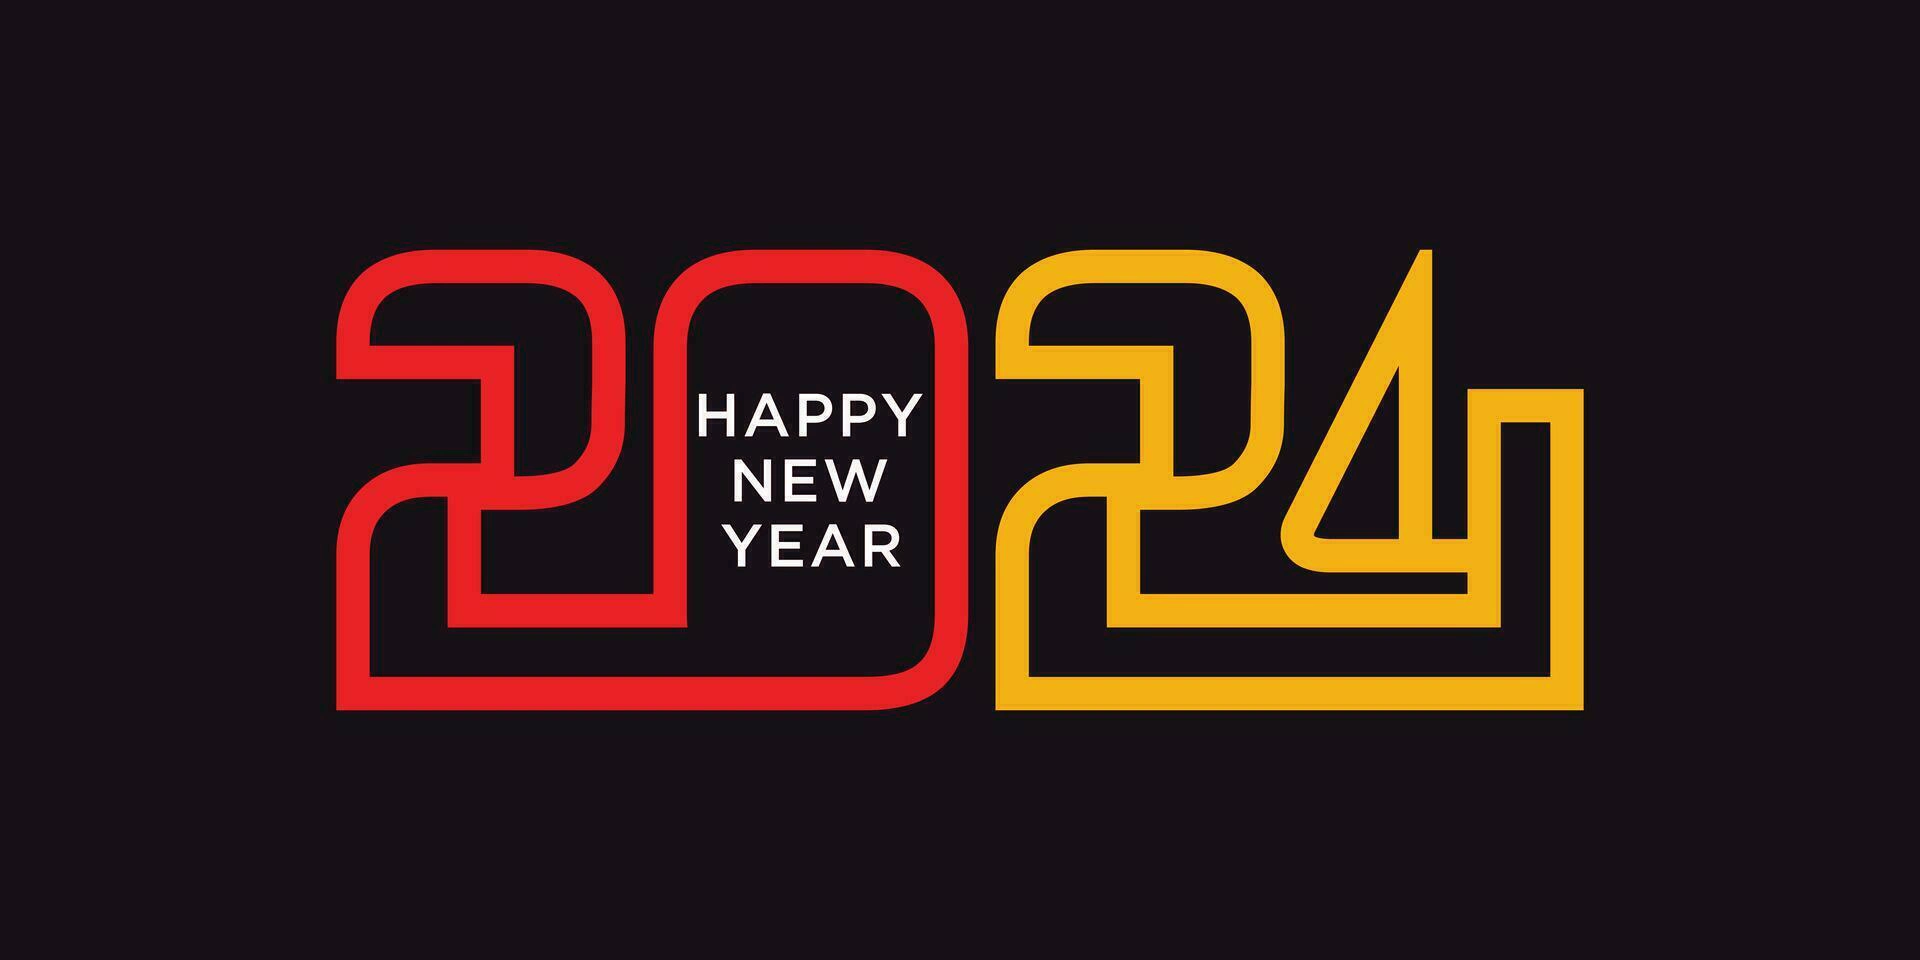 2024 happy new year logo design illustration for new year 2024 with creative idea vector